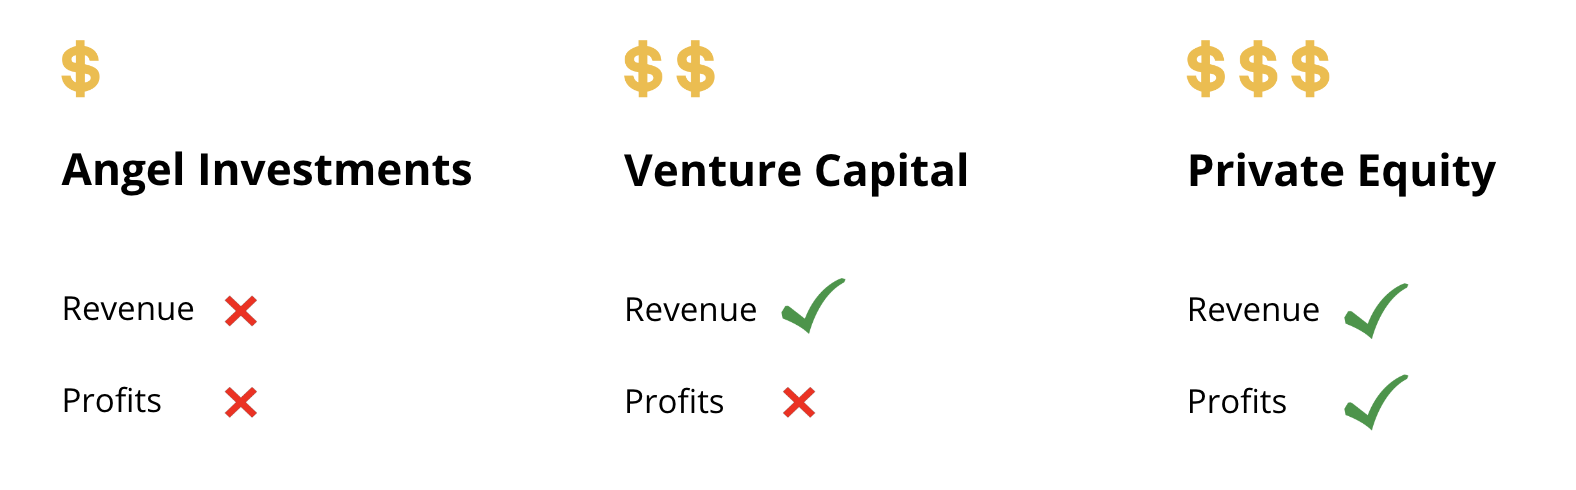 Angel Investments vs Venture Capital vs Private Equity